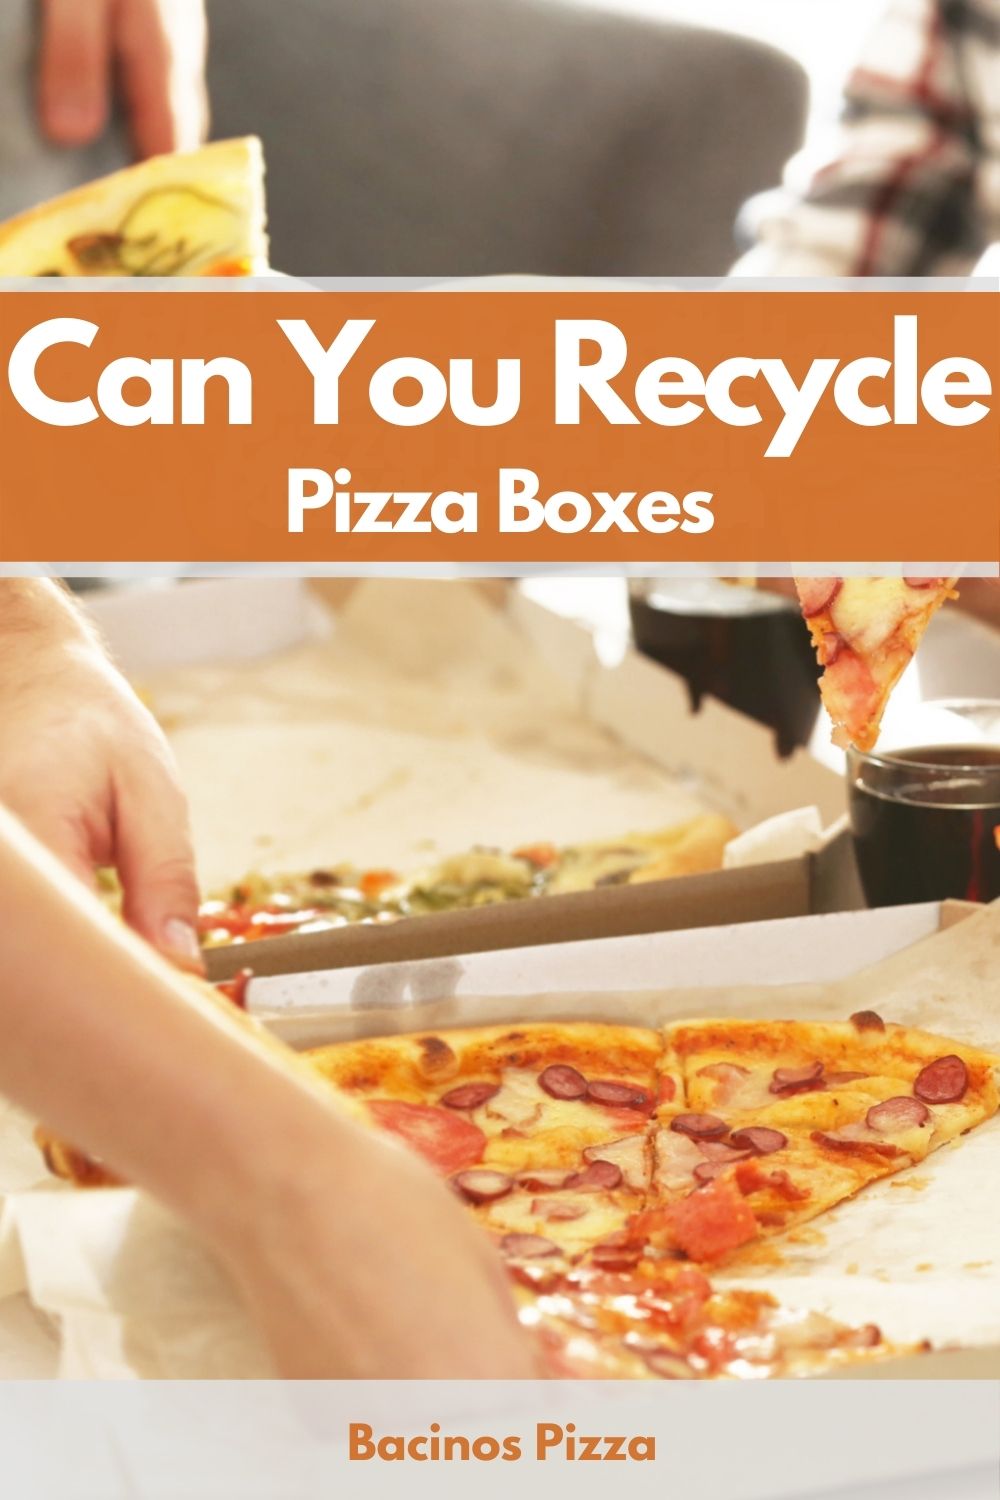 Can You Recycle Pizza Boxes pin 2